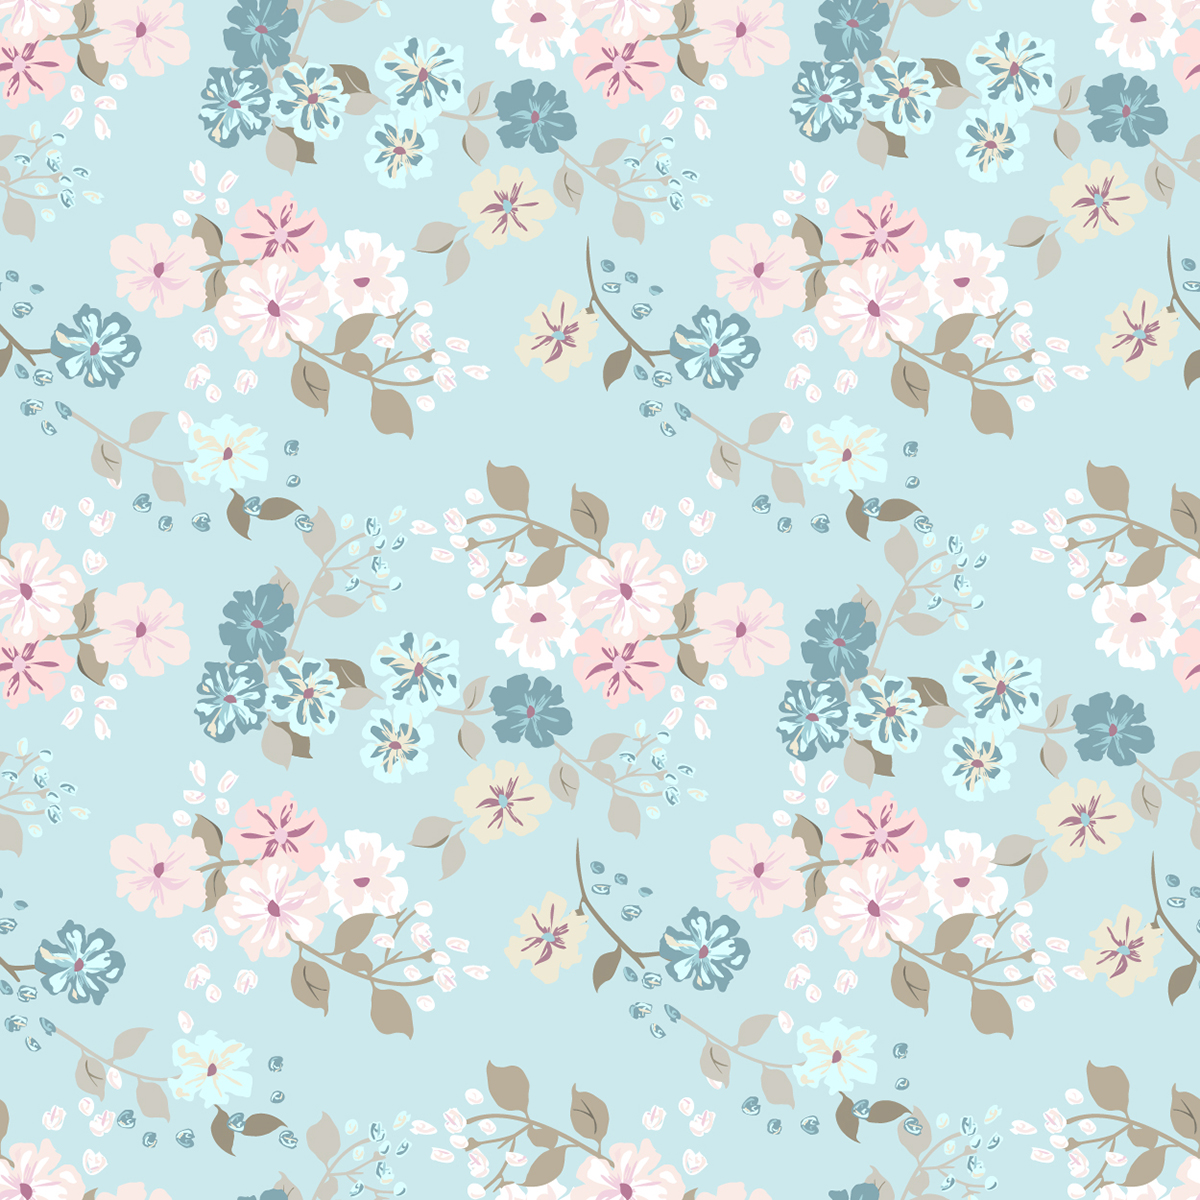 A pattern of flowers on a blue background